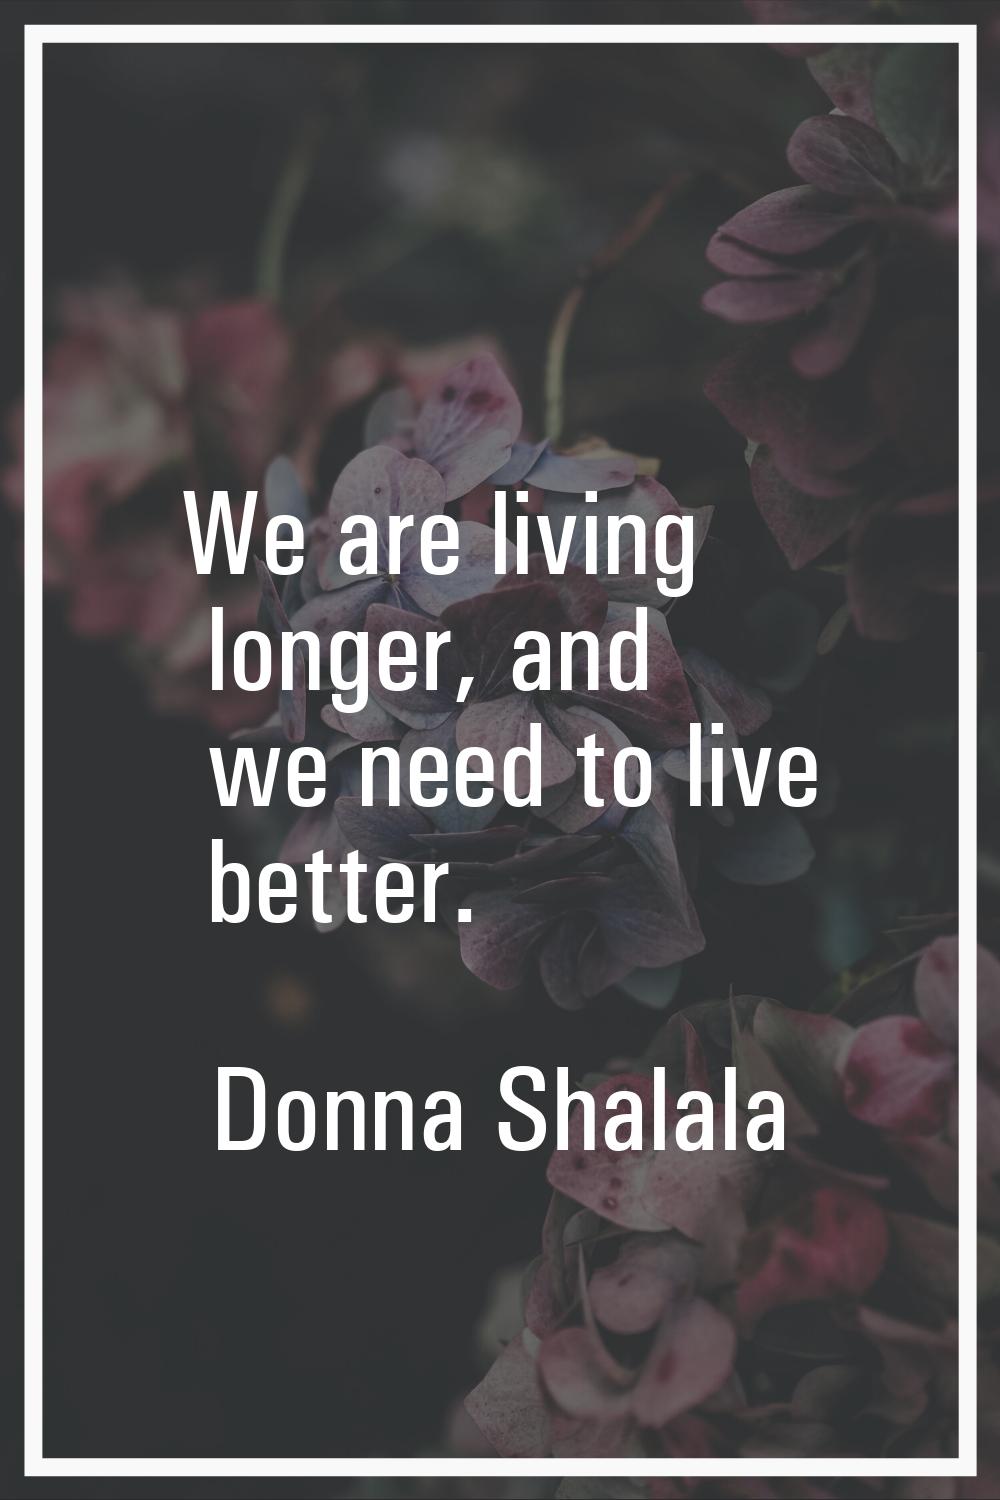 We are living longer, and we need to live better.